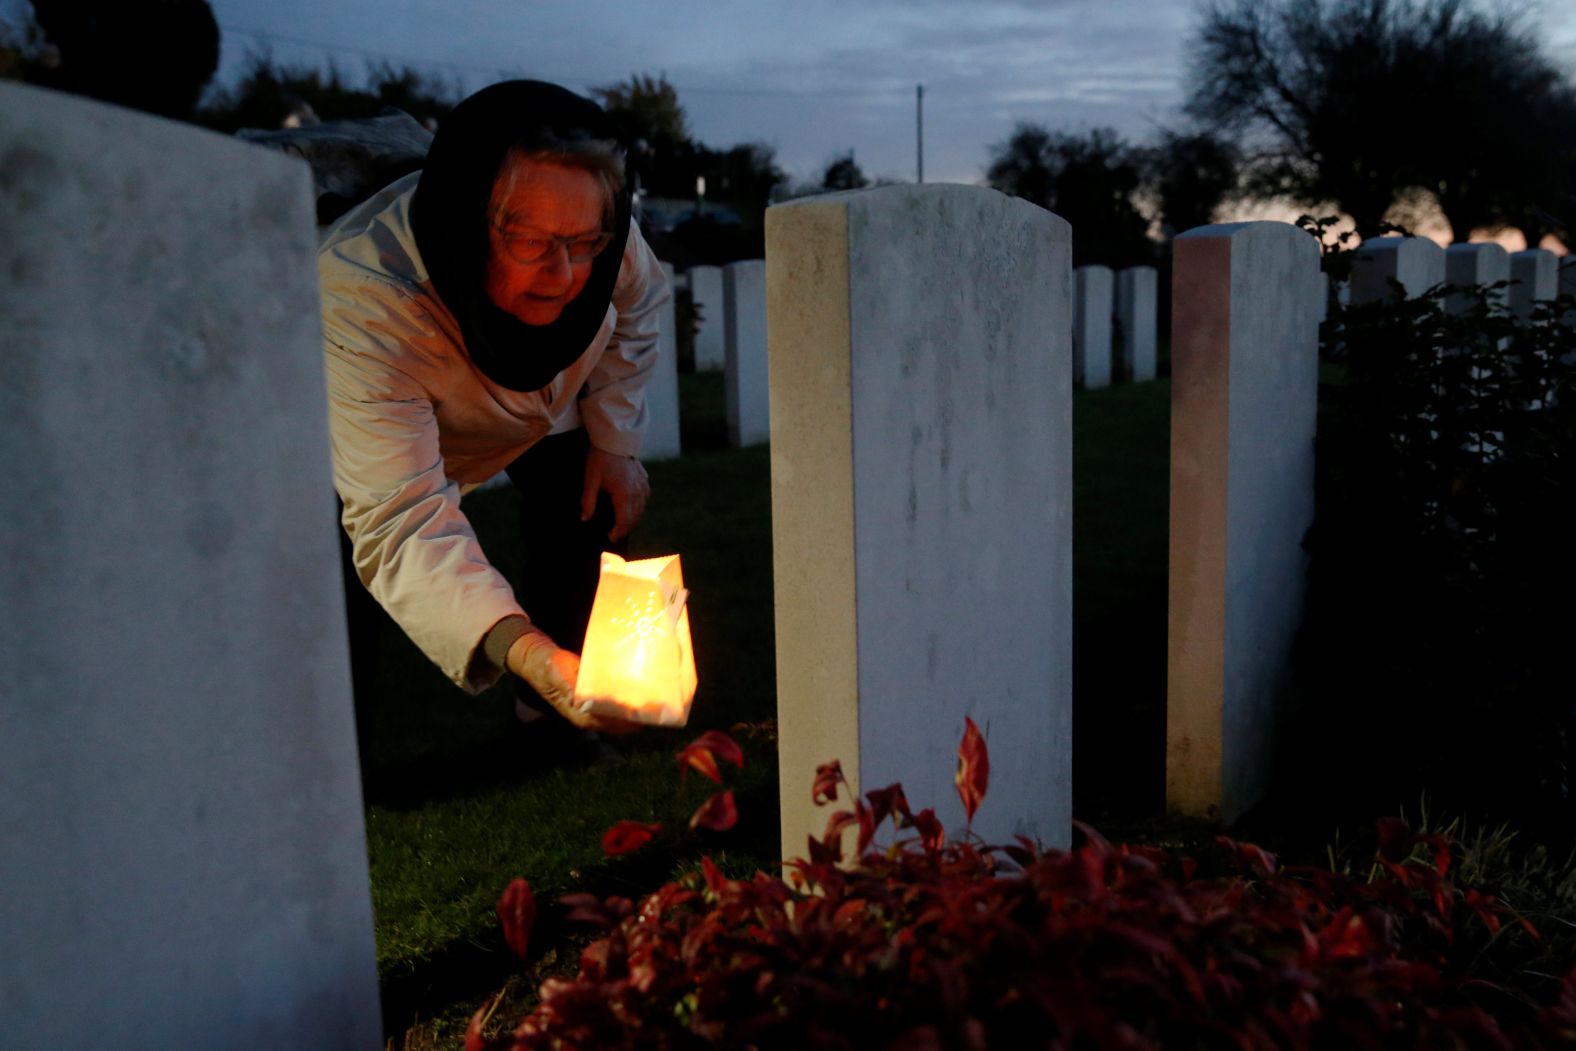 A woman places a candle at the grave of a soldier who died during World War I, at La Targette British Cemetery on November 10 in Neuville-Saint-Vaast, France.